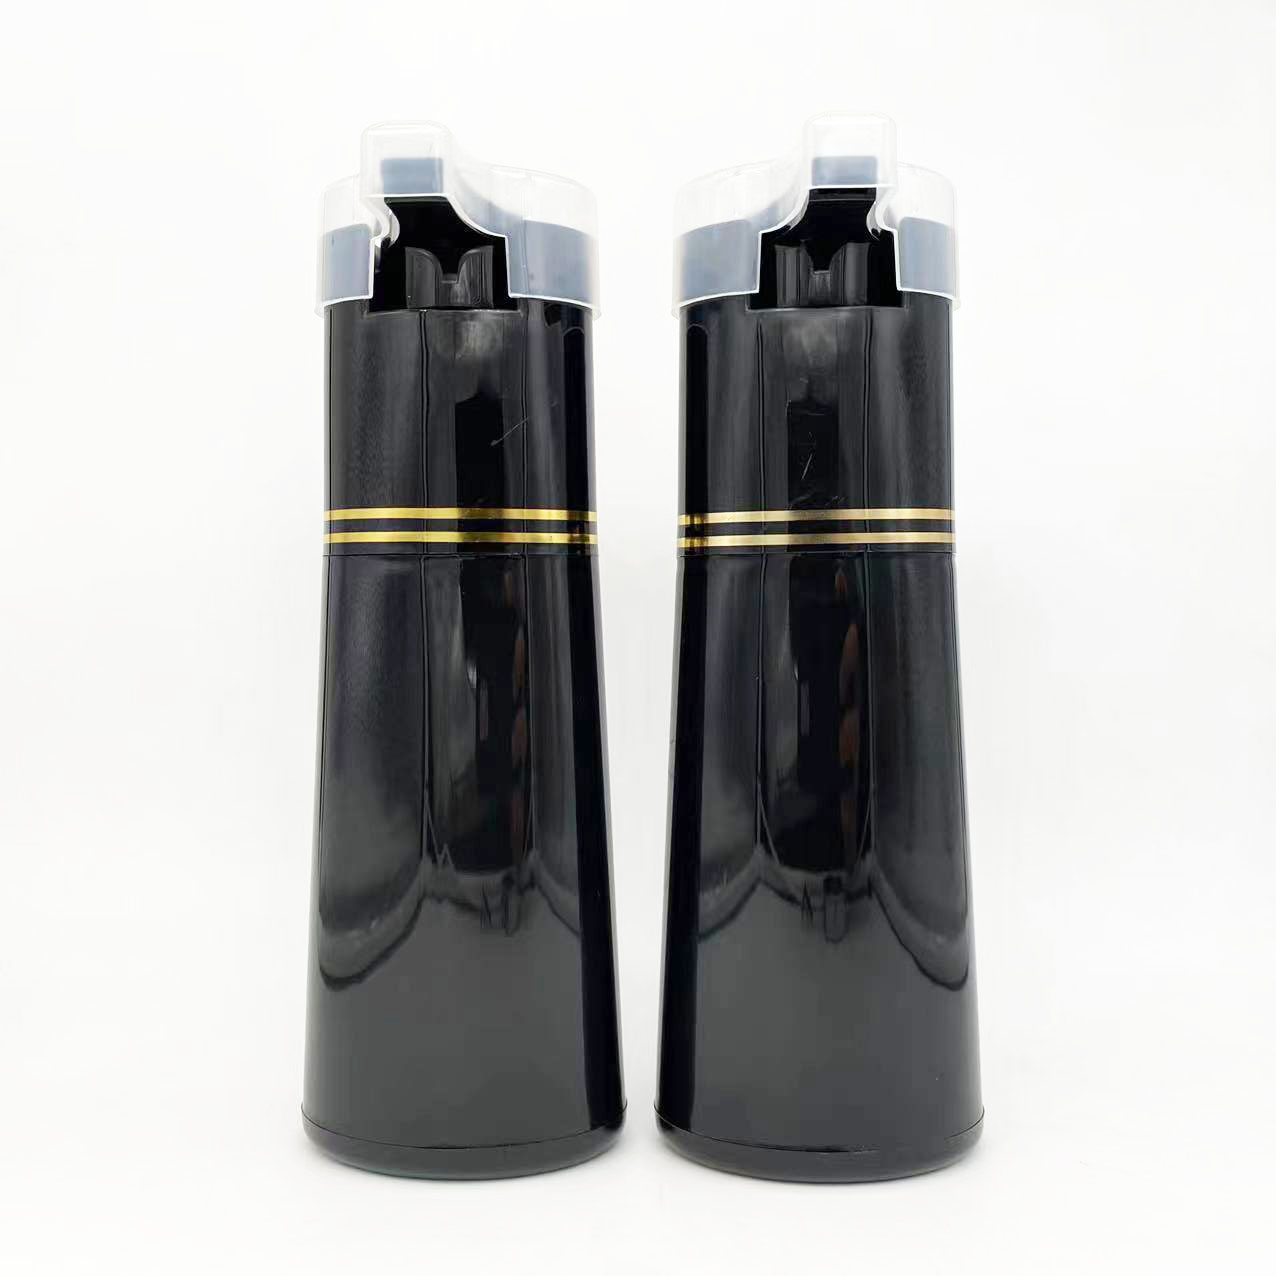 200ml 2 in 1 hair dye bottles with pump for shampoo